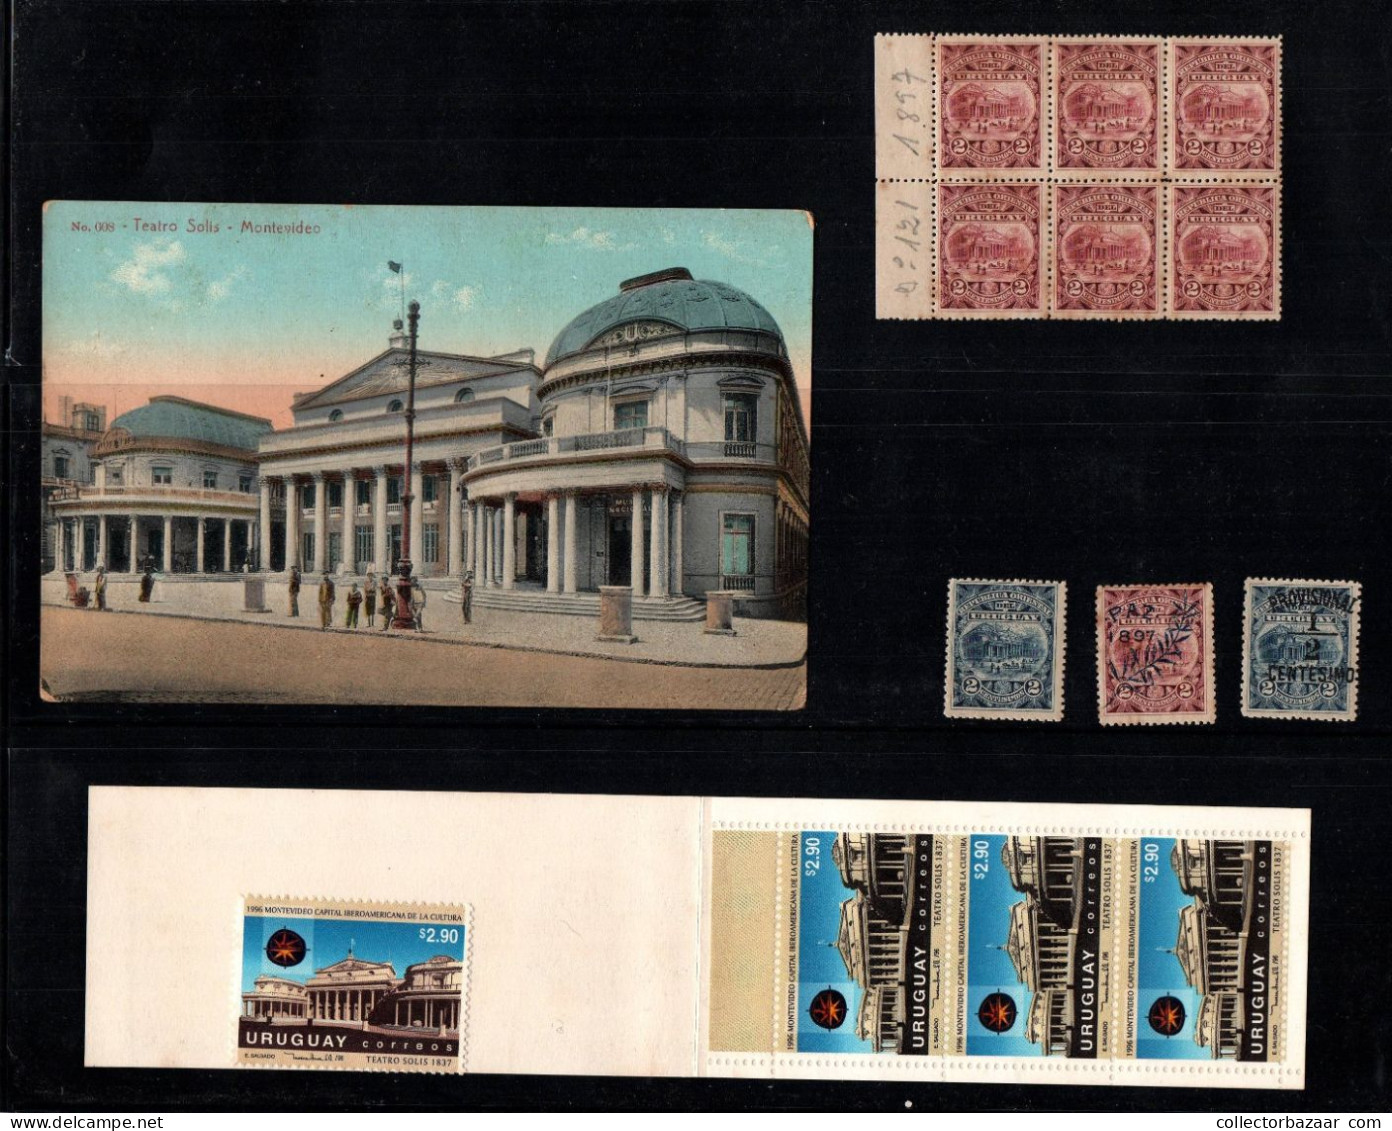 Solis Theatre Uruguay Stamps Postcard Collection Epitome Of Masonic Architecture Freemasonry - Franc-Maçonnerie